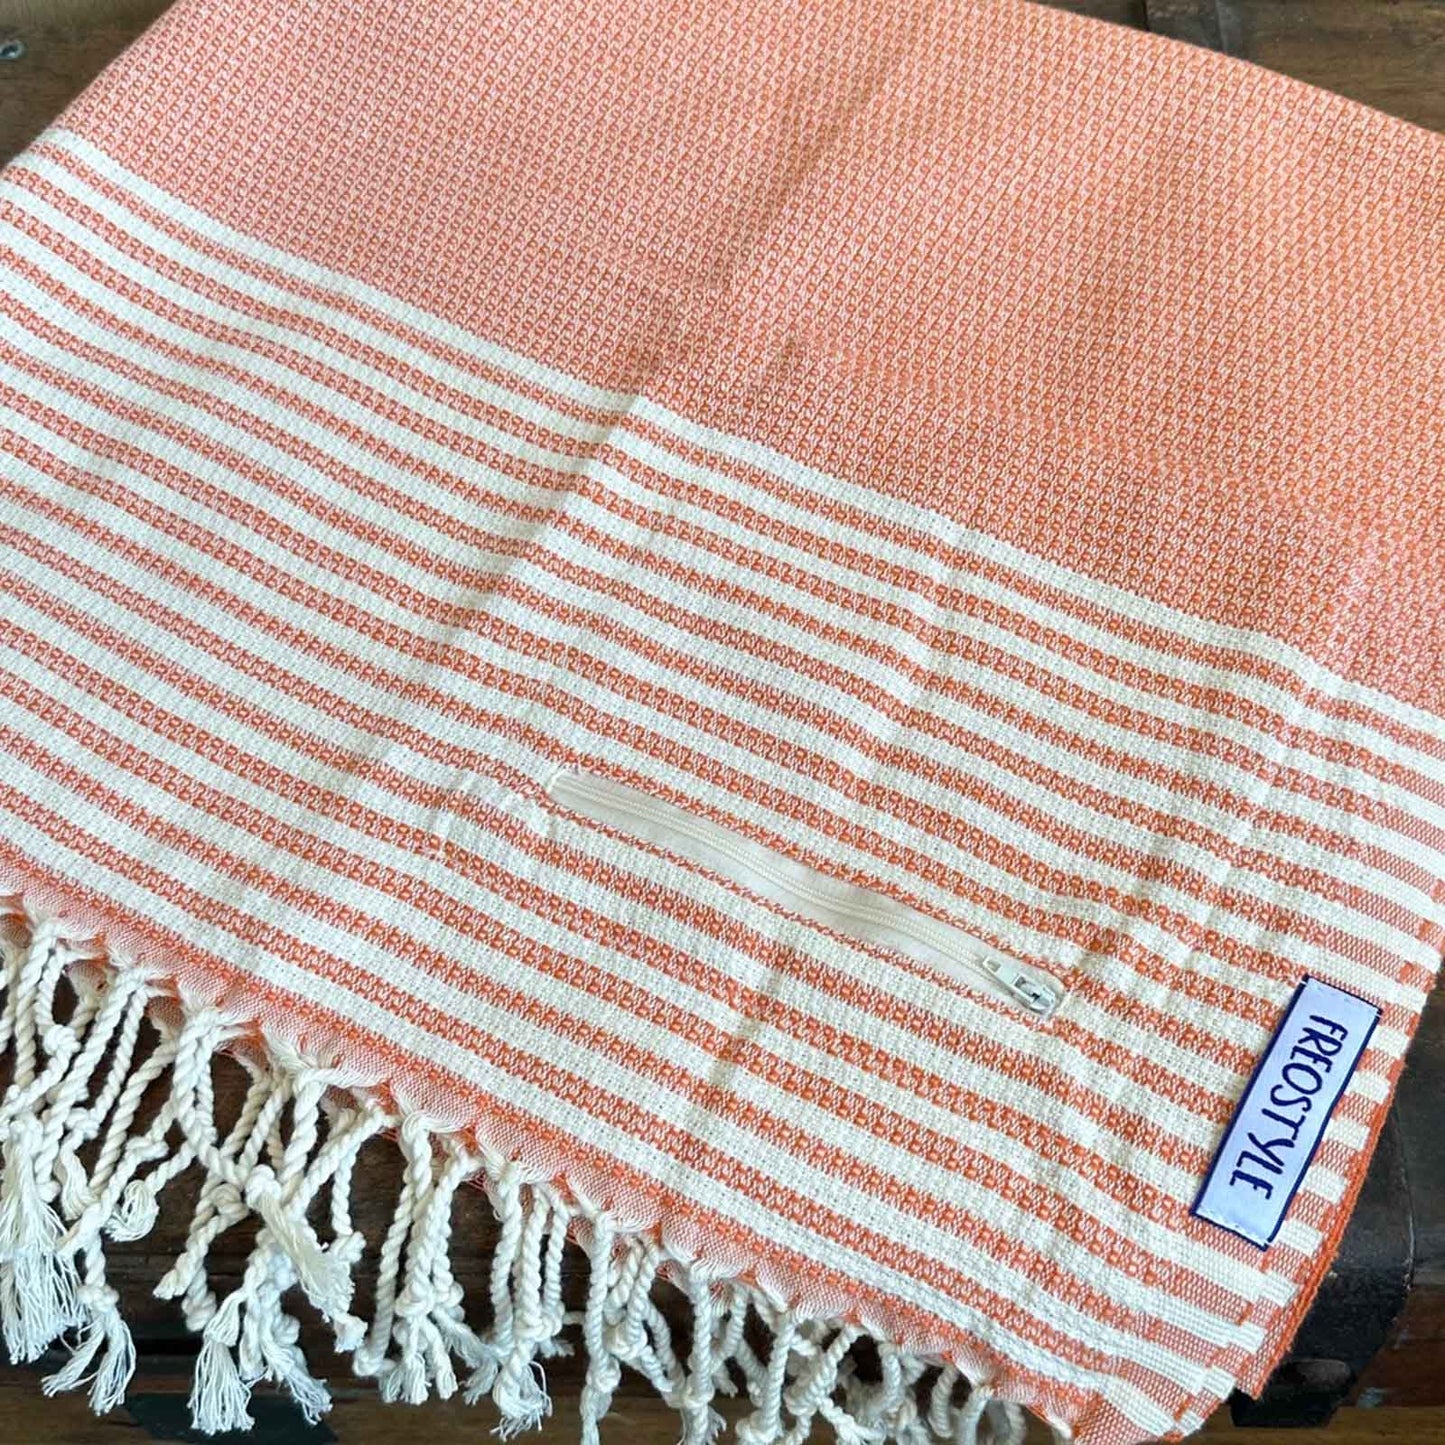 Clementine Turkish Towel with Pockets, by Freostyle, folded